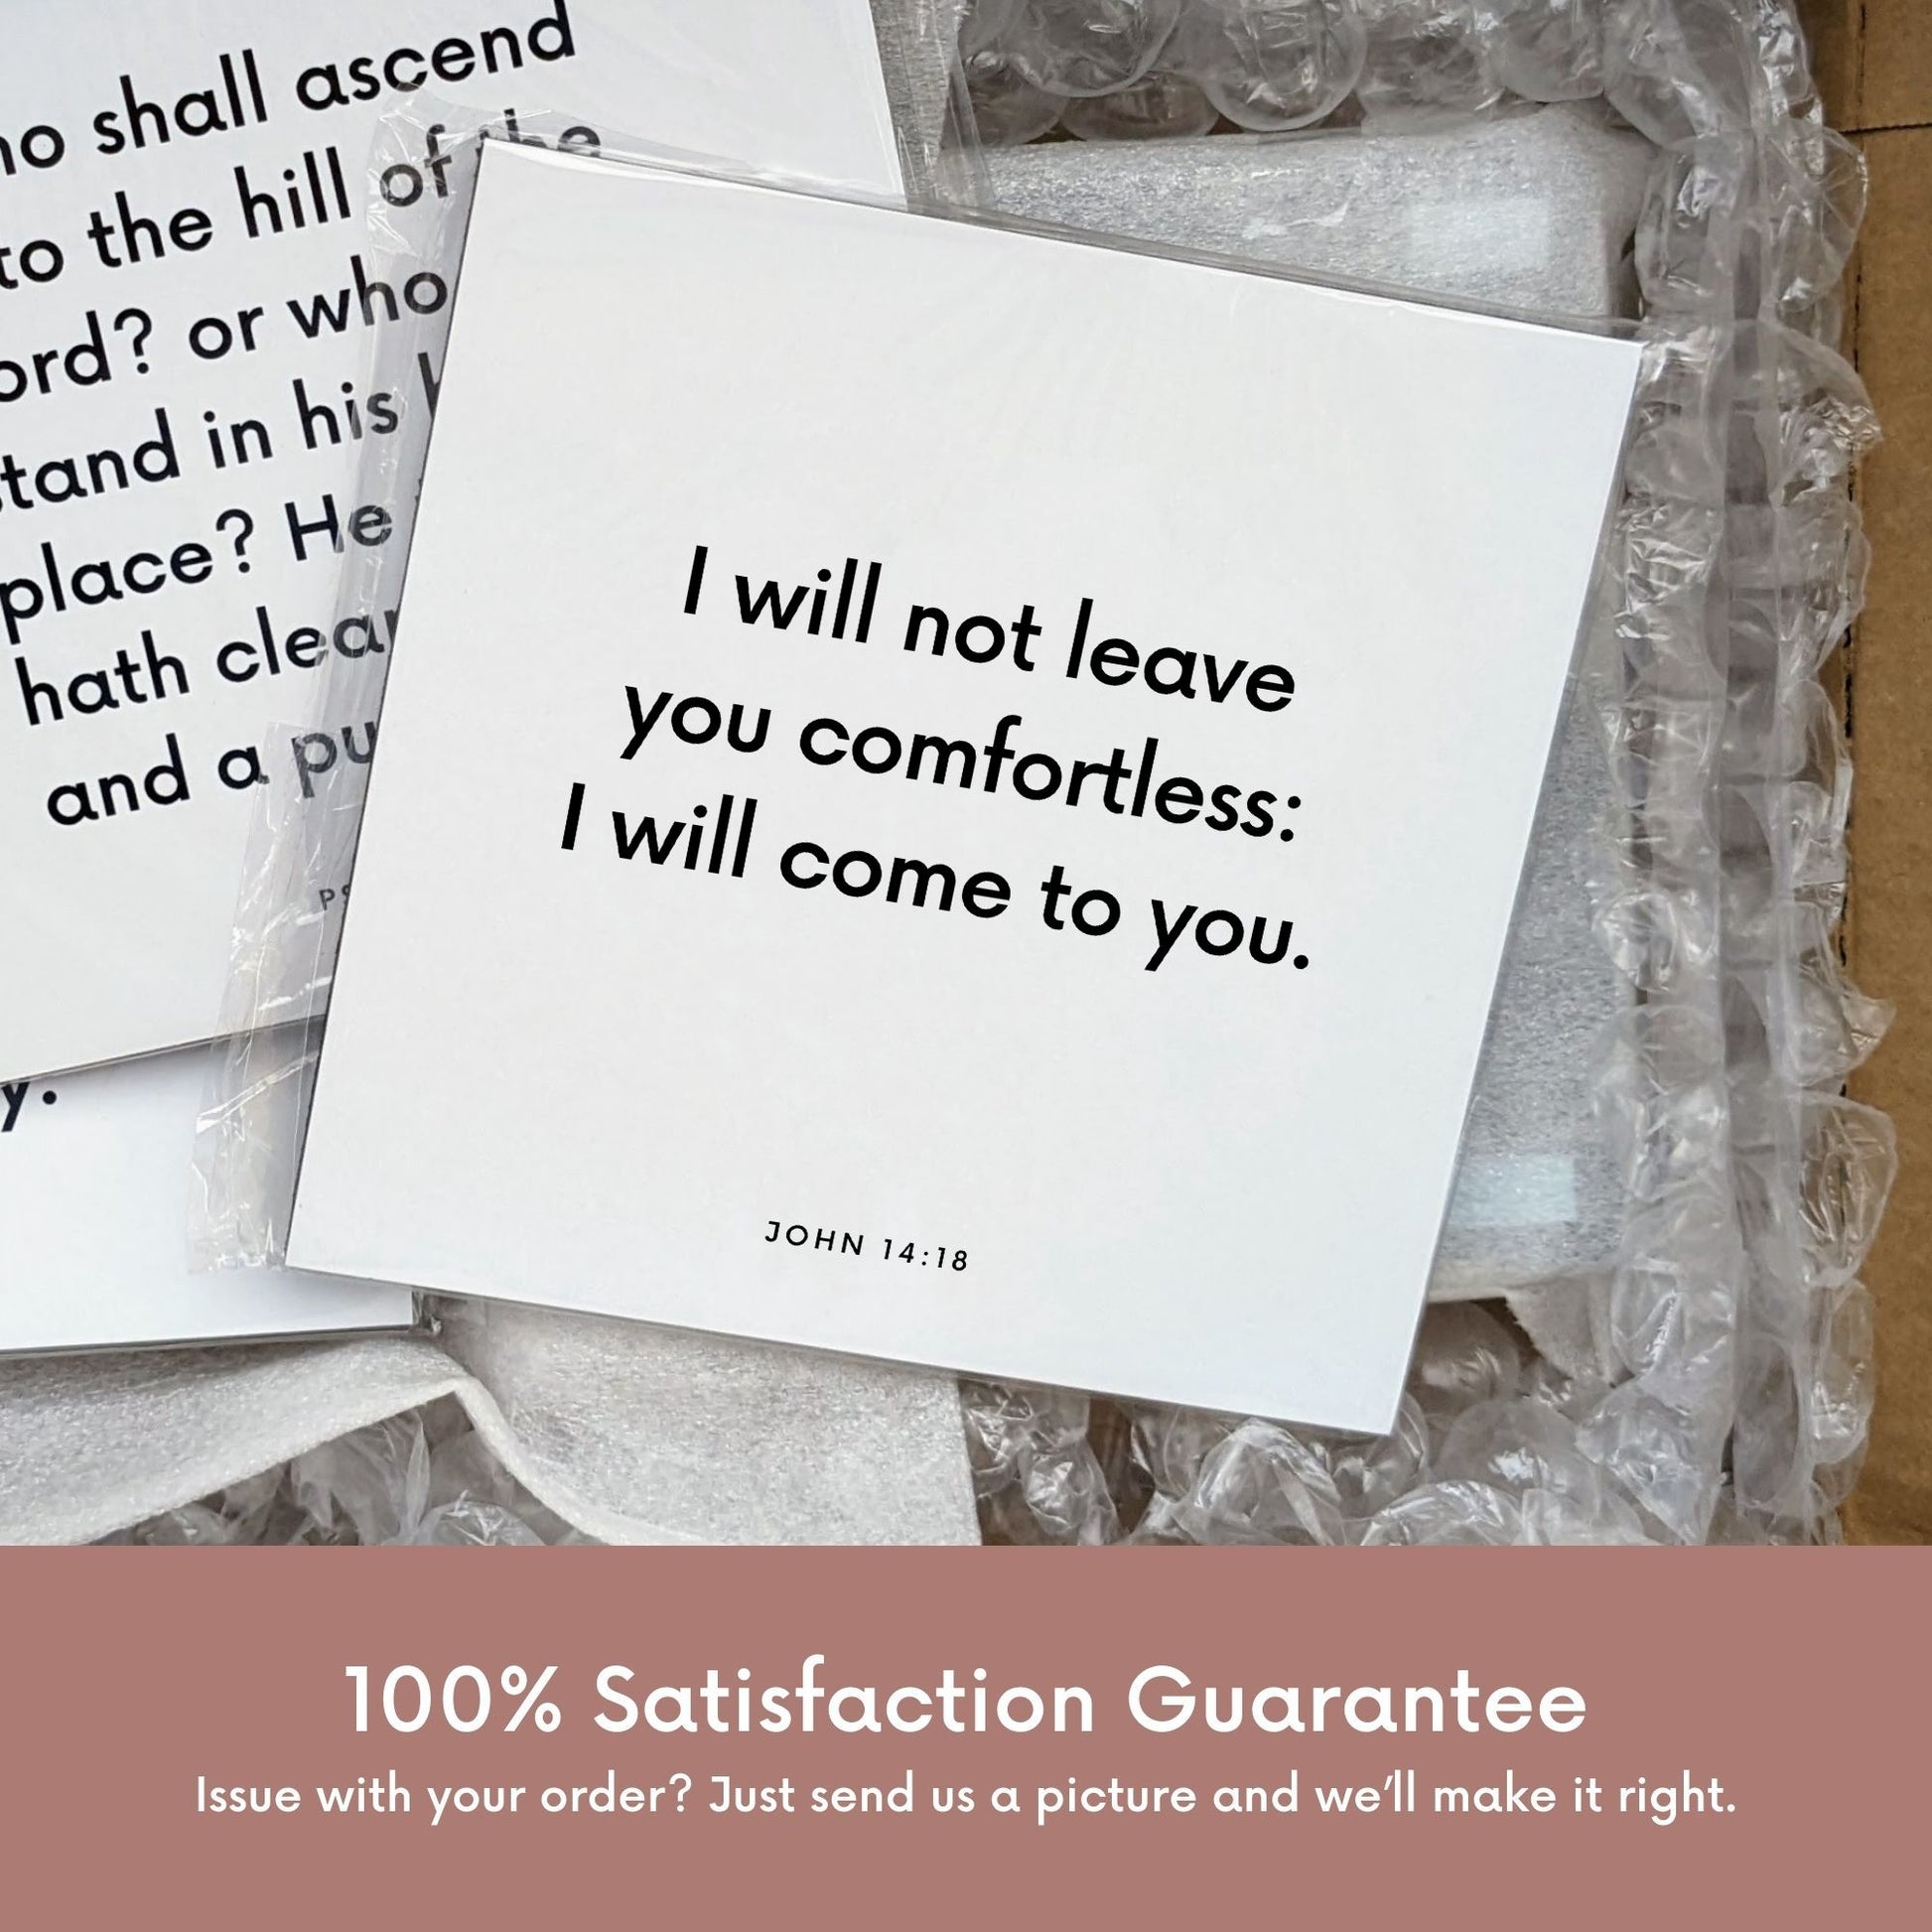 Shipping materials for scripture tile of John 14:18 - "I will not leave you comfortless: I will come to you"